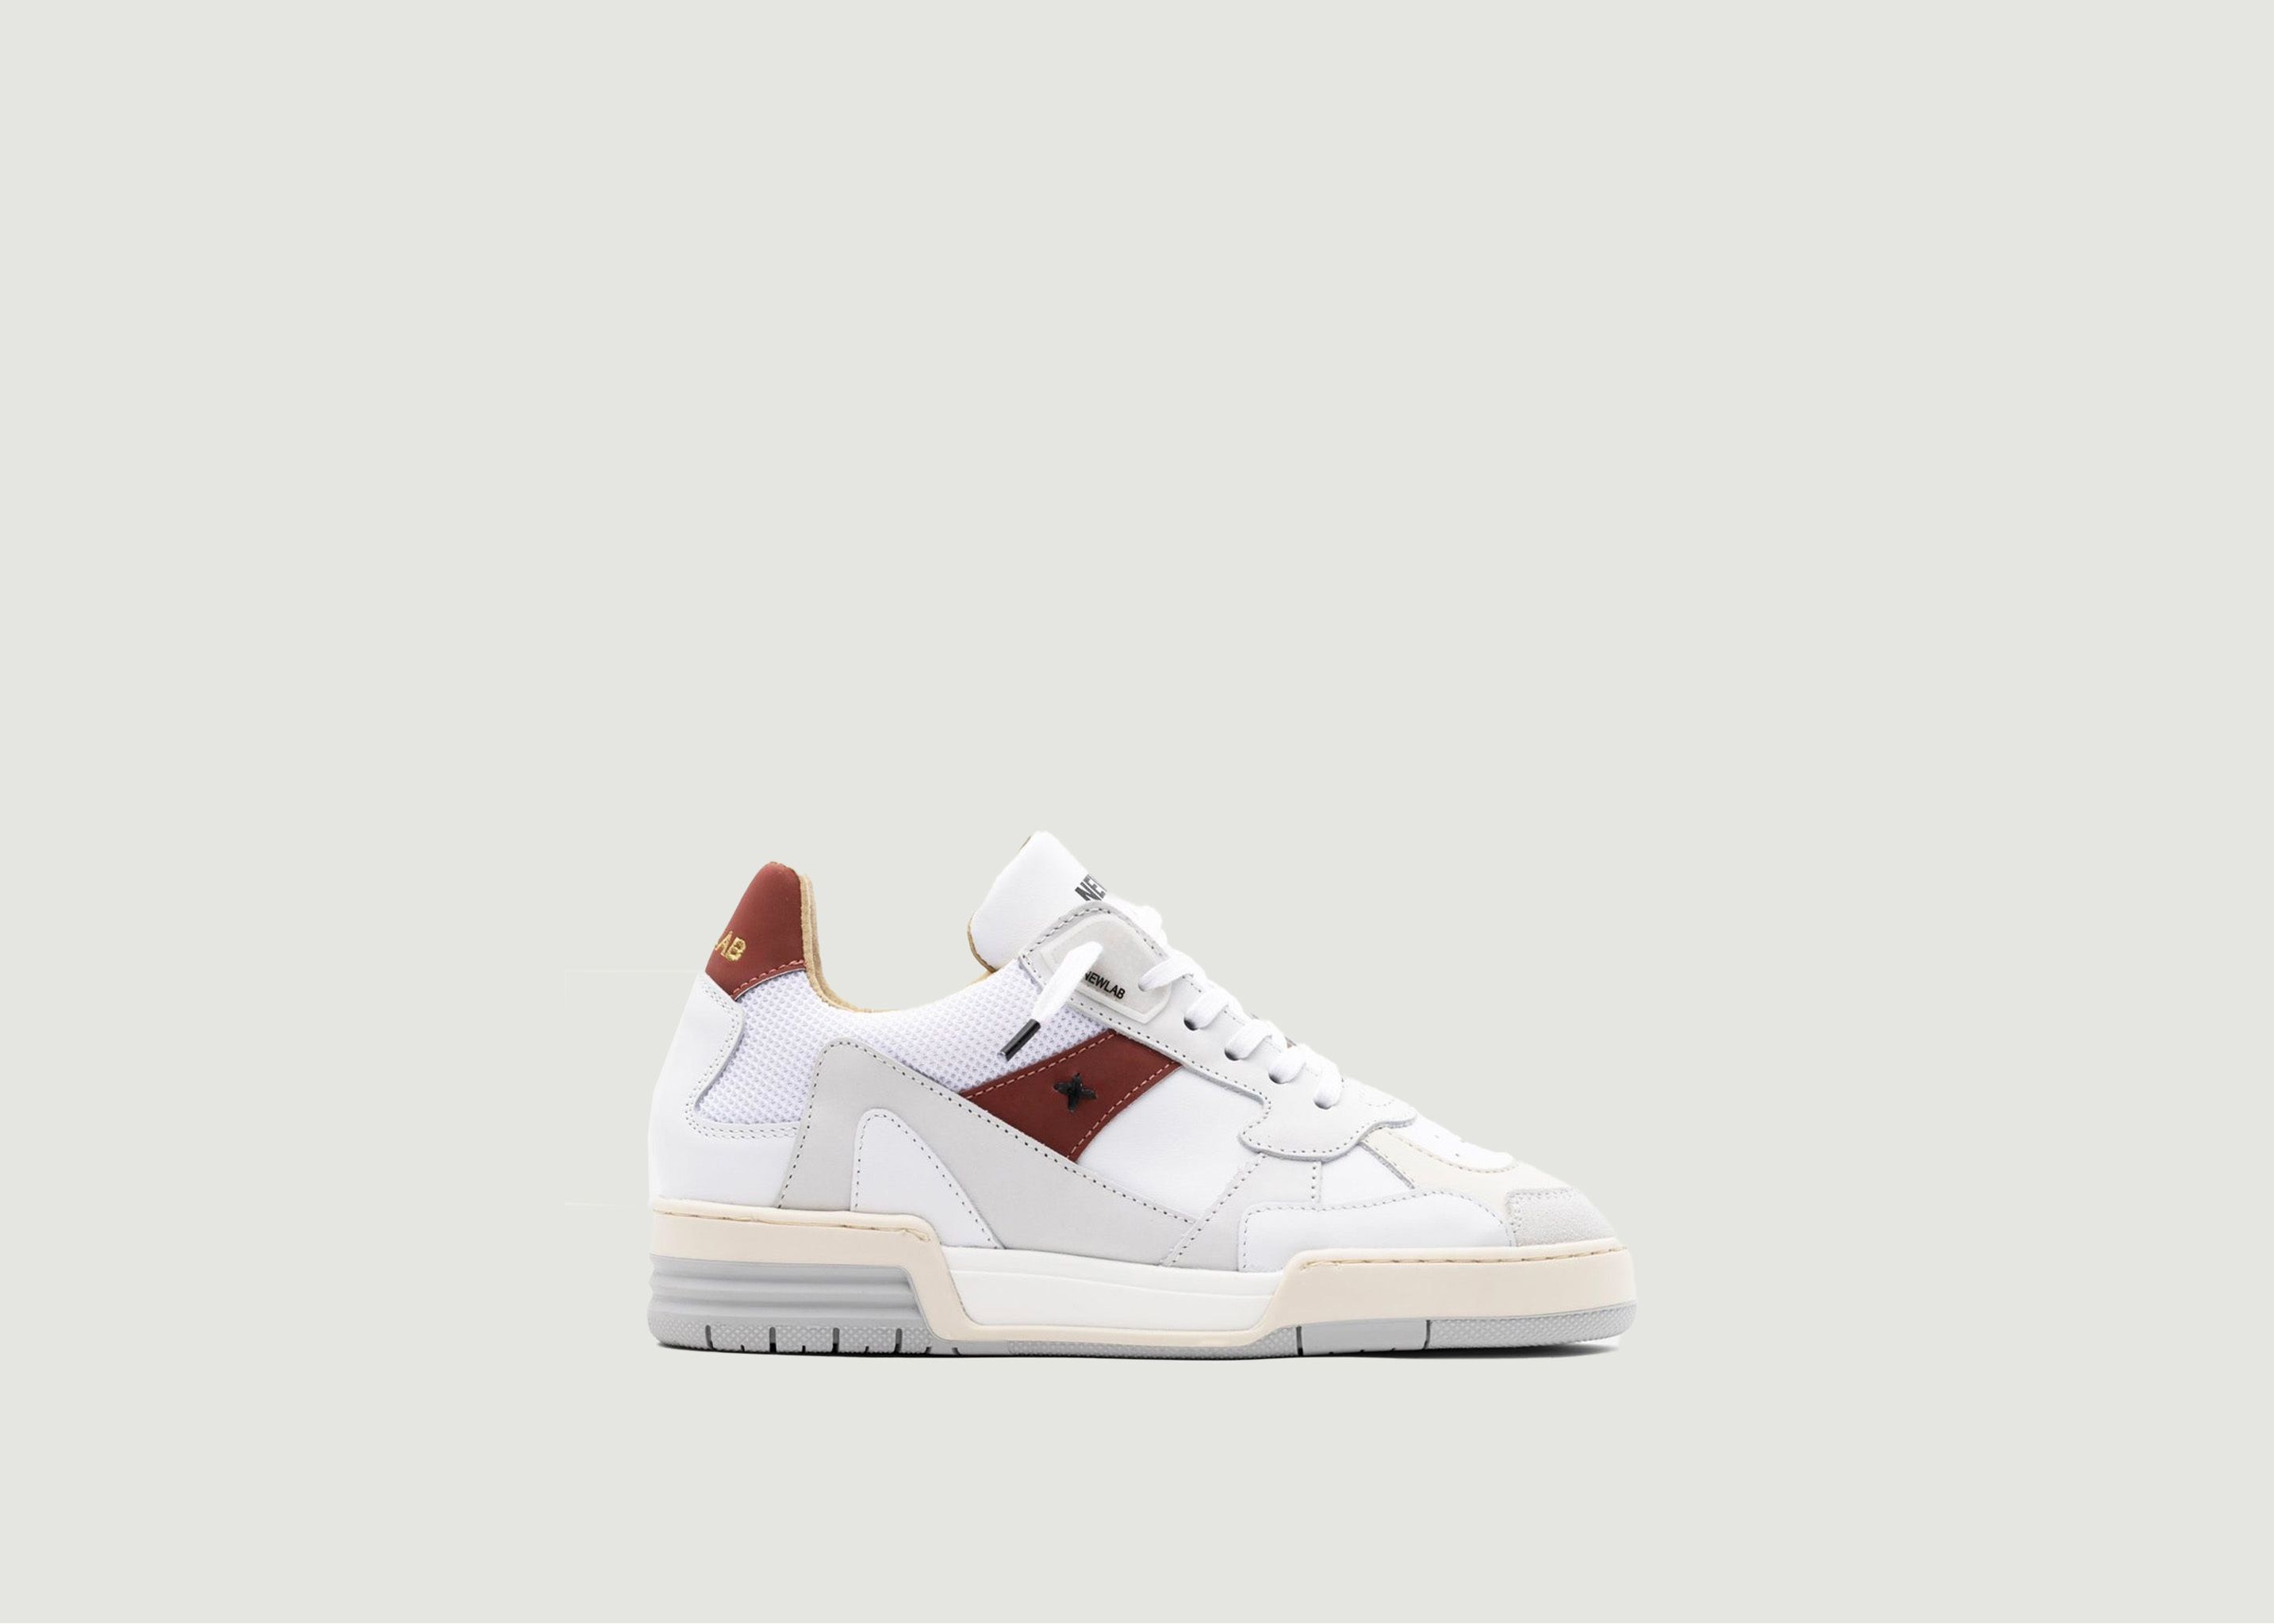 Sneaker White/Red - Newlab